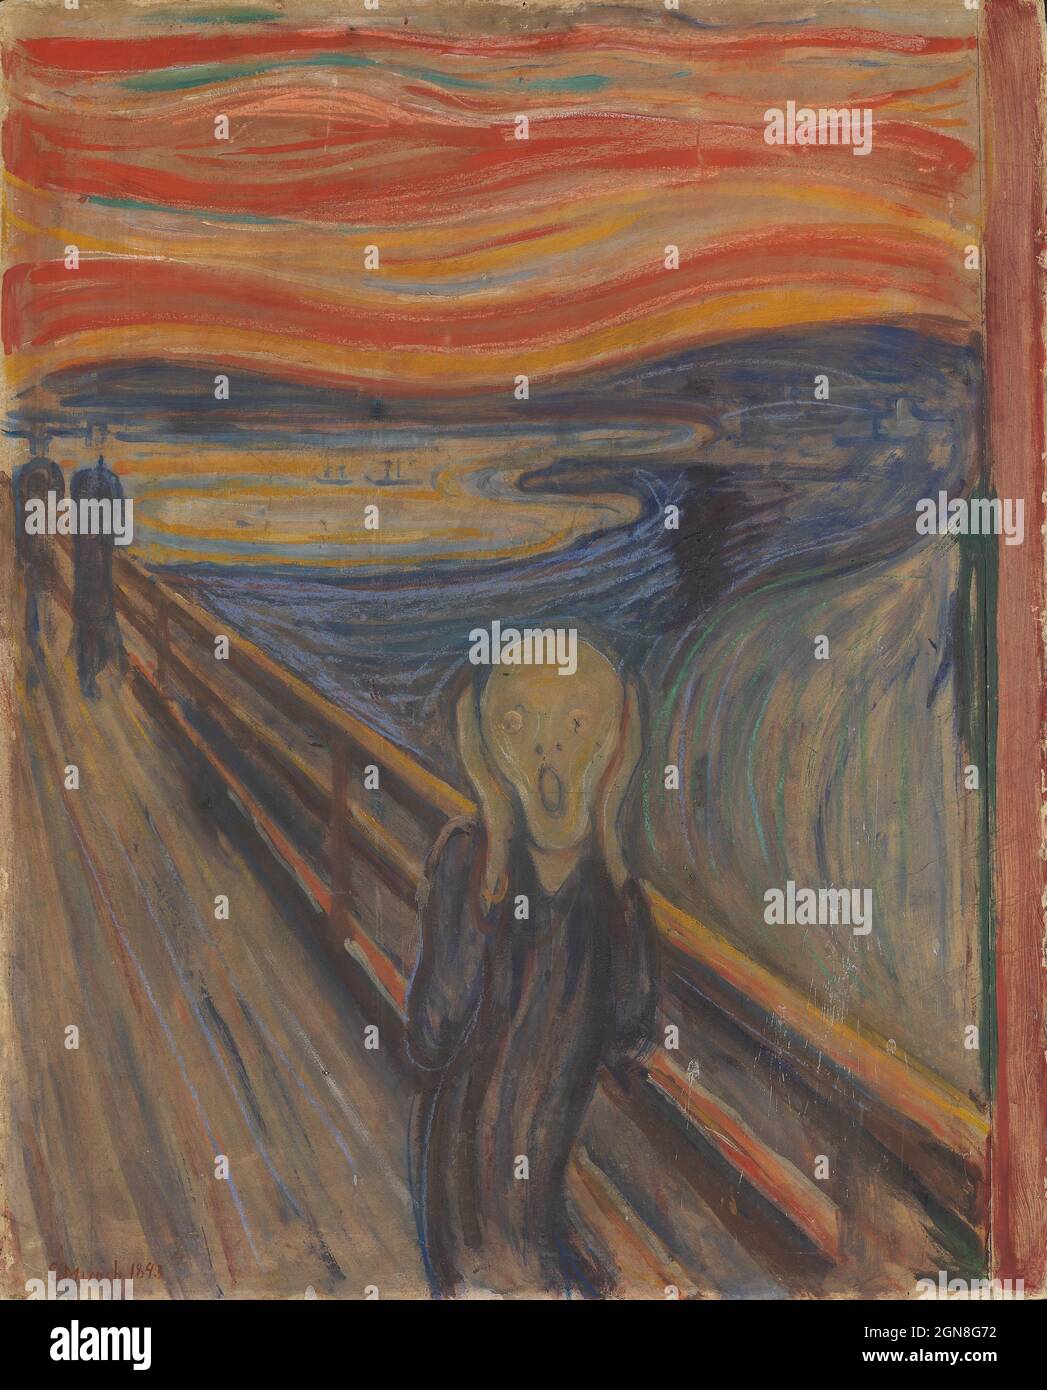 Edvard Munch, 1893, The Scream, oil, tempera and pastel on cardboard, 91x73 cm, National Gallery of Norway. Stock Photo